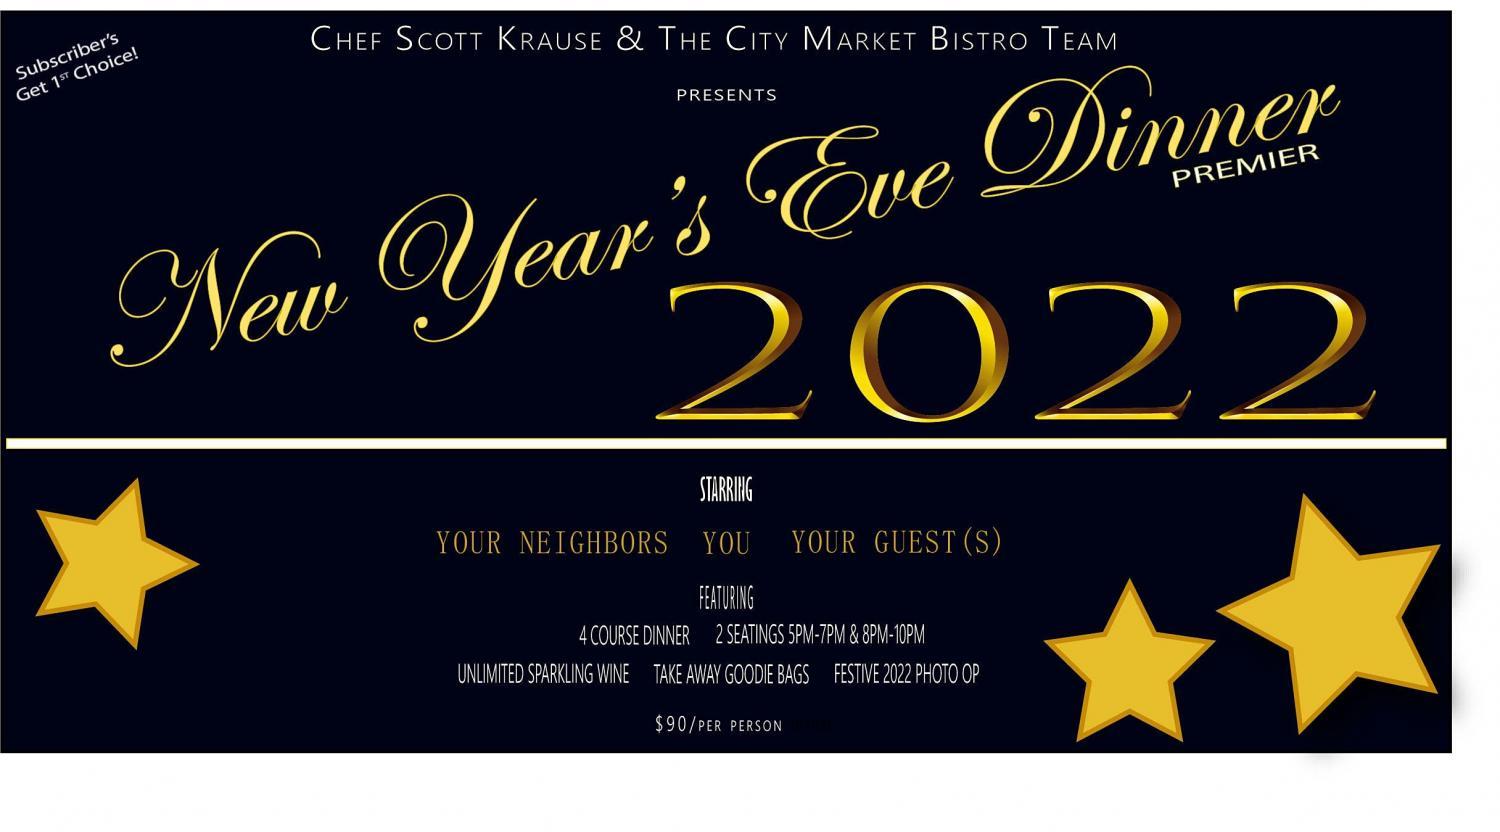 New Year's Eve Dinner/Premier (8PM-10PM)